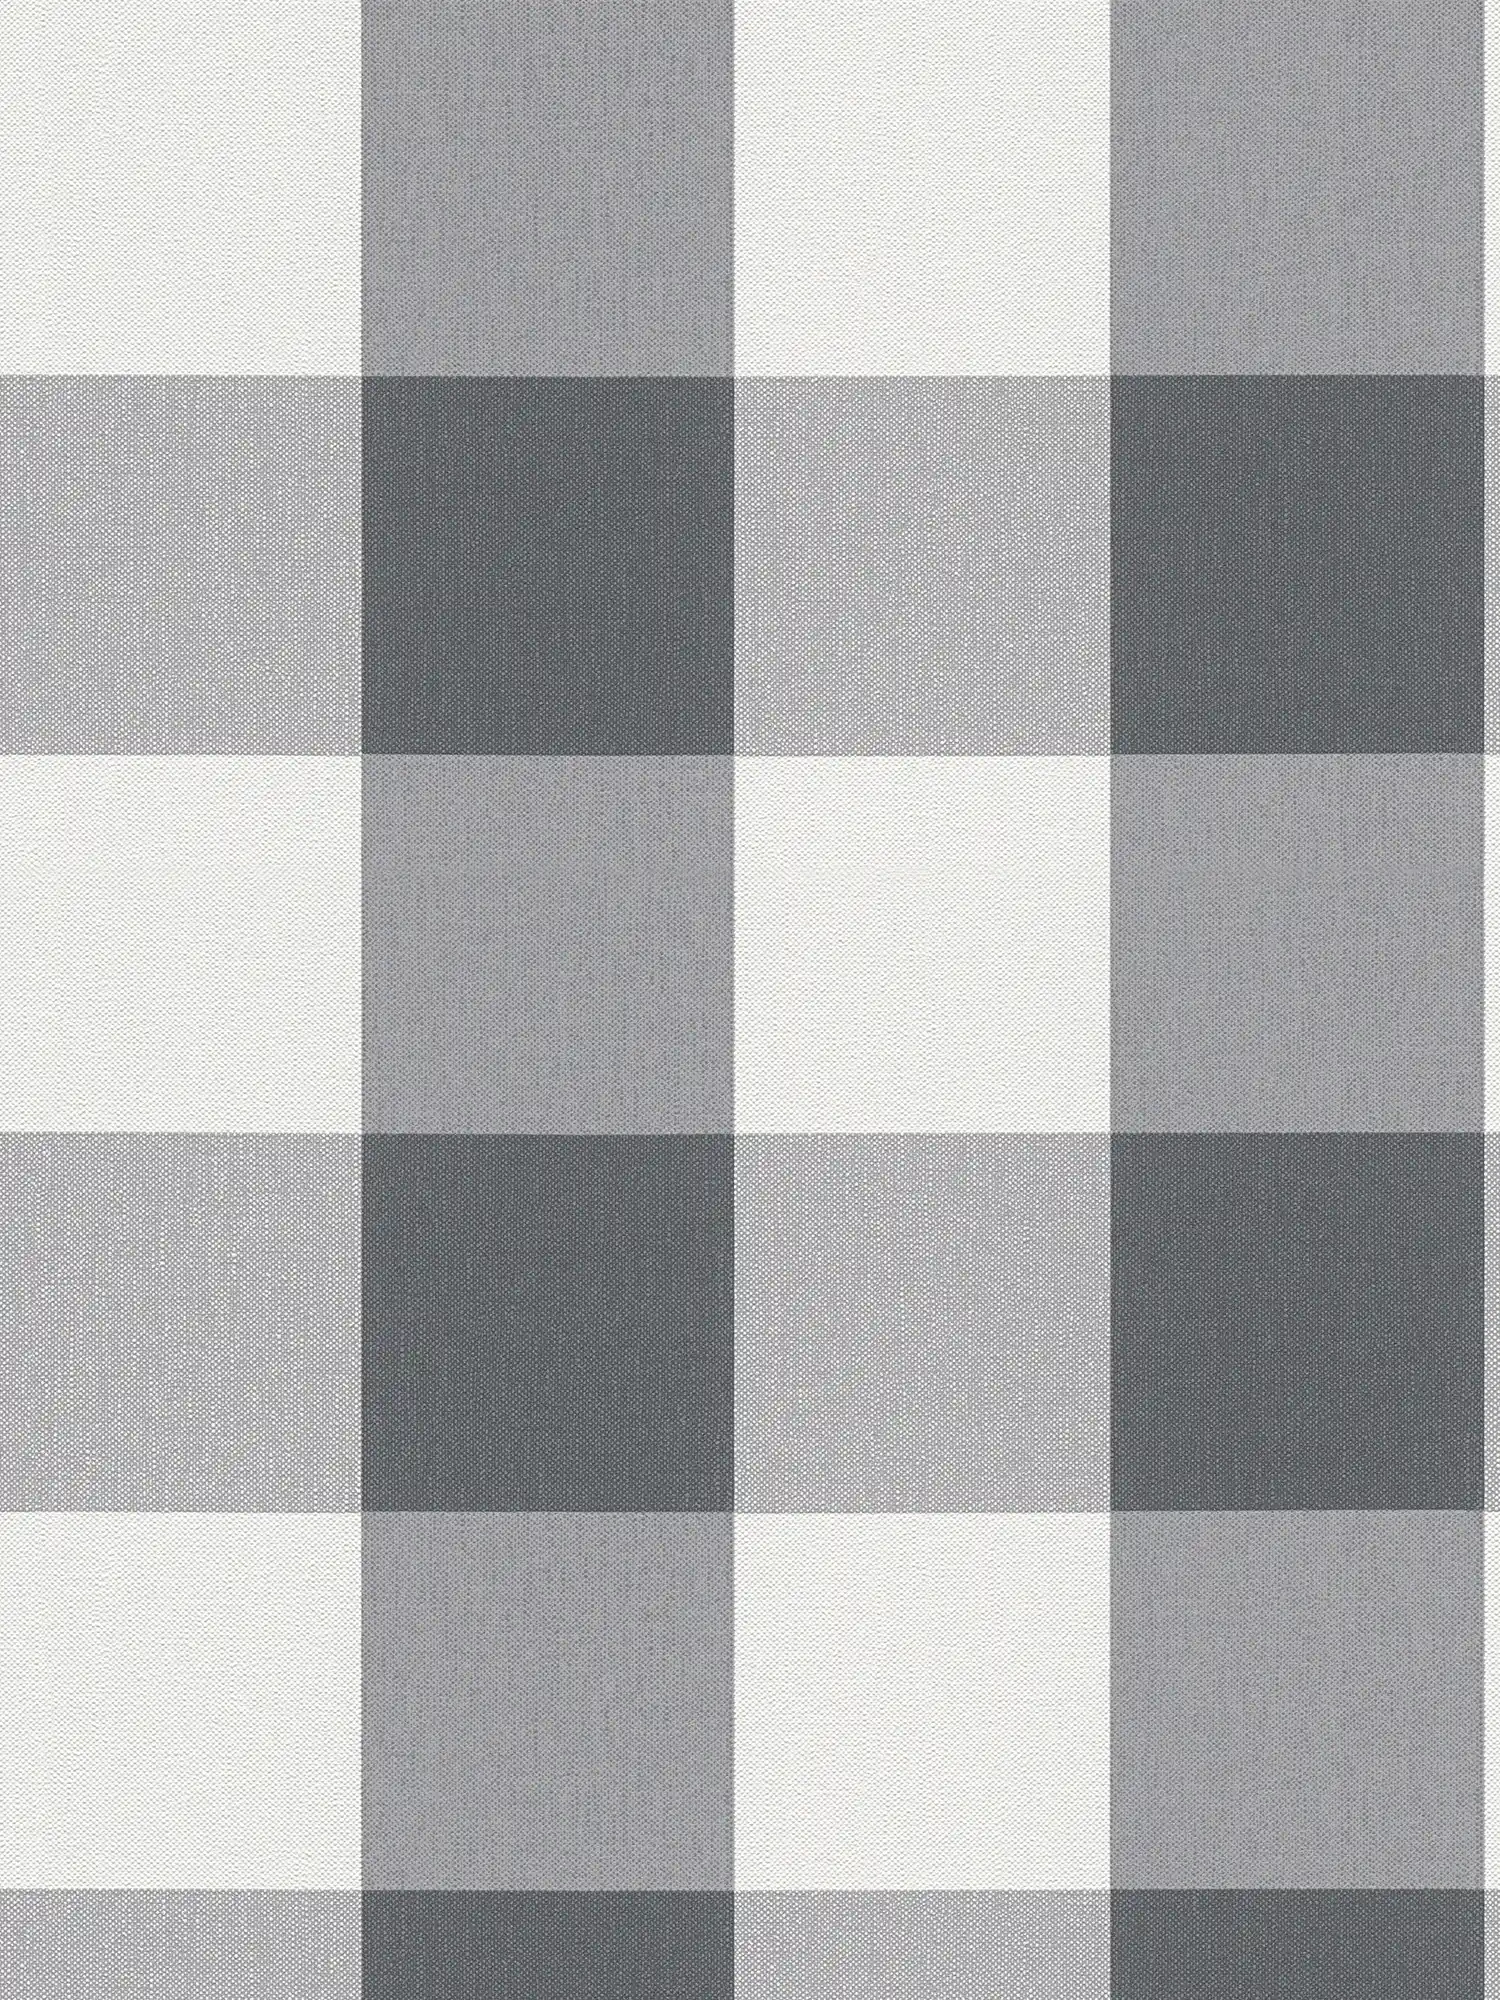 Plaid wallpaper with textile look in harmonious colours - white, grey
